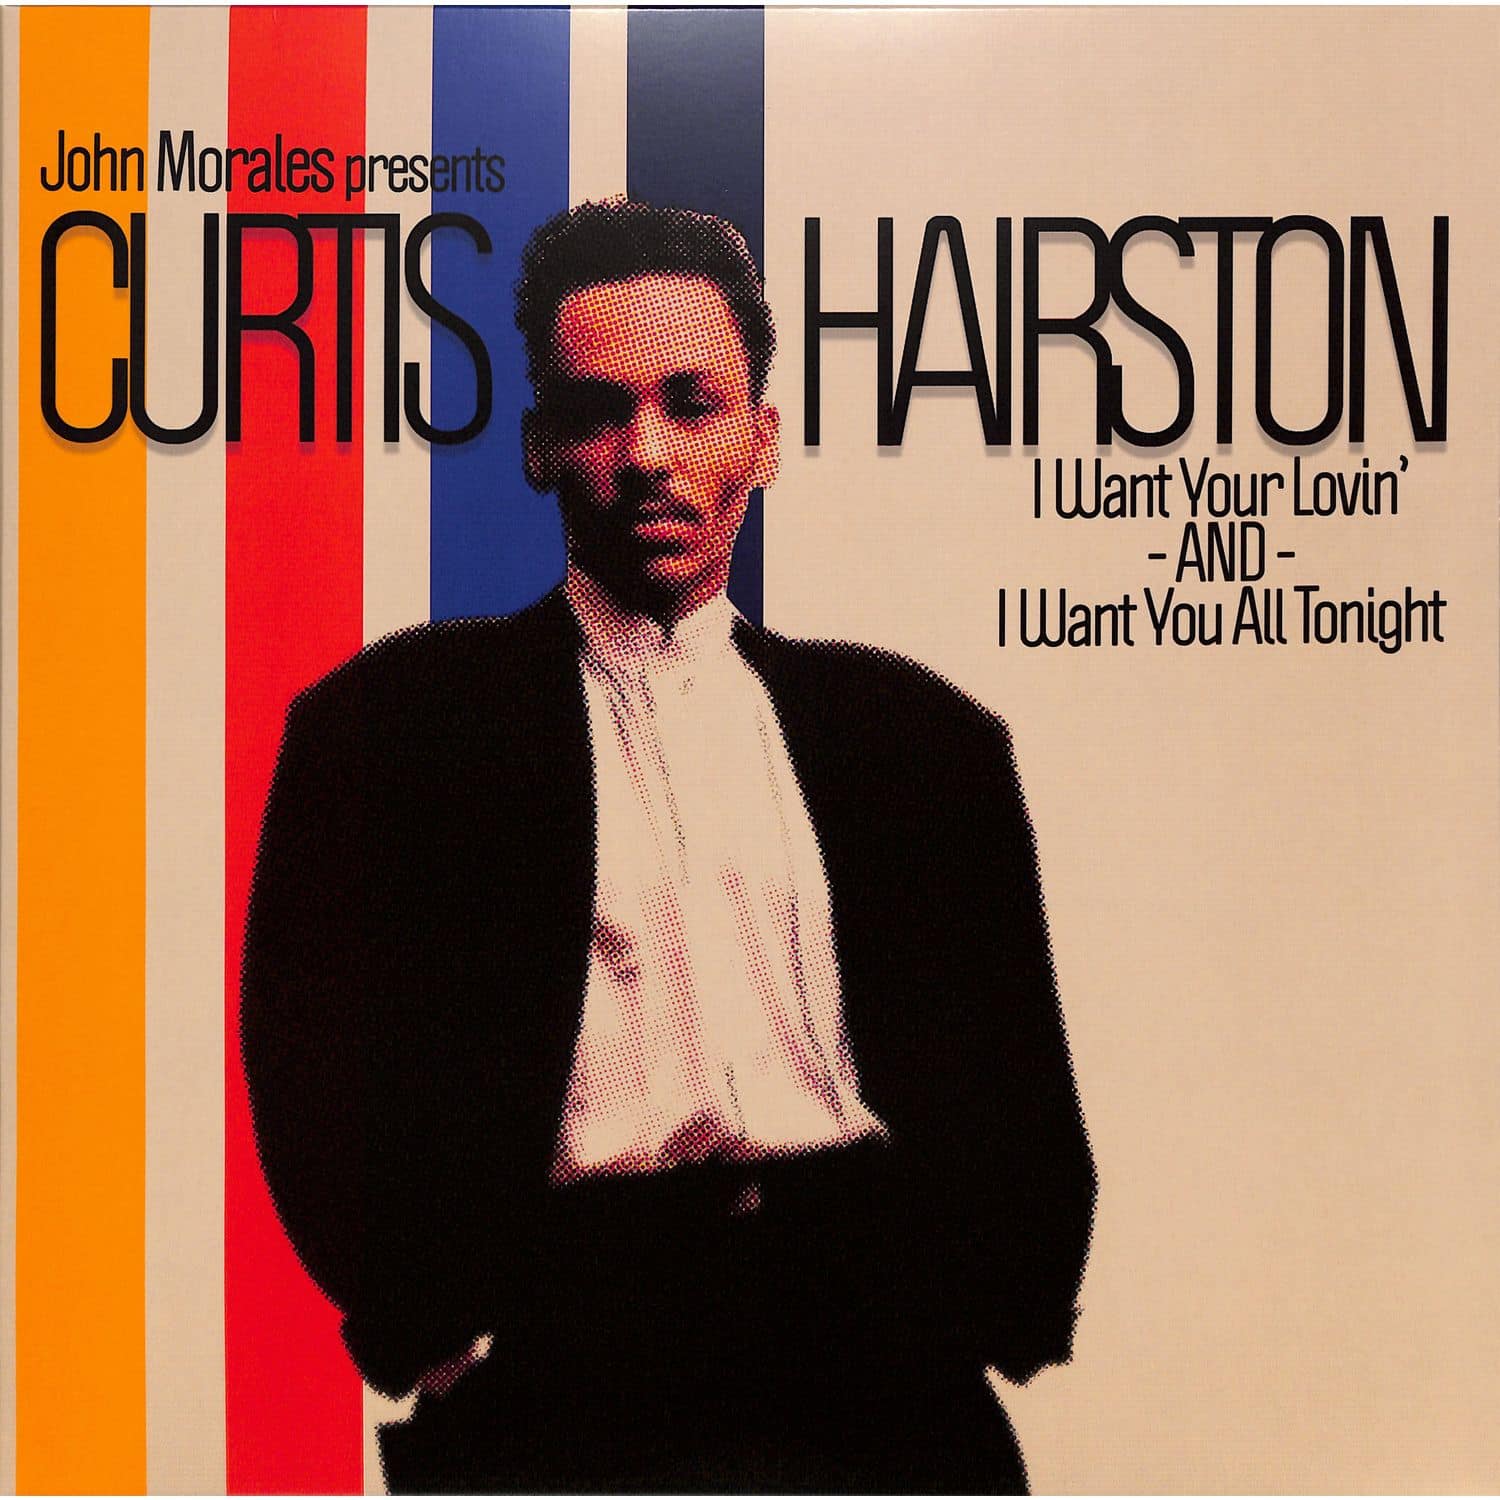 John Morales Presents Curtis Hairston - I WANT YOUR LOVIN / I WANT YOU ALL